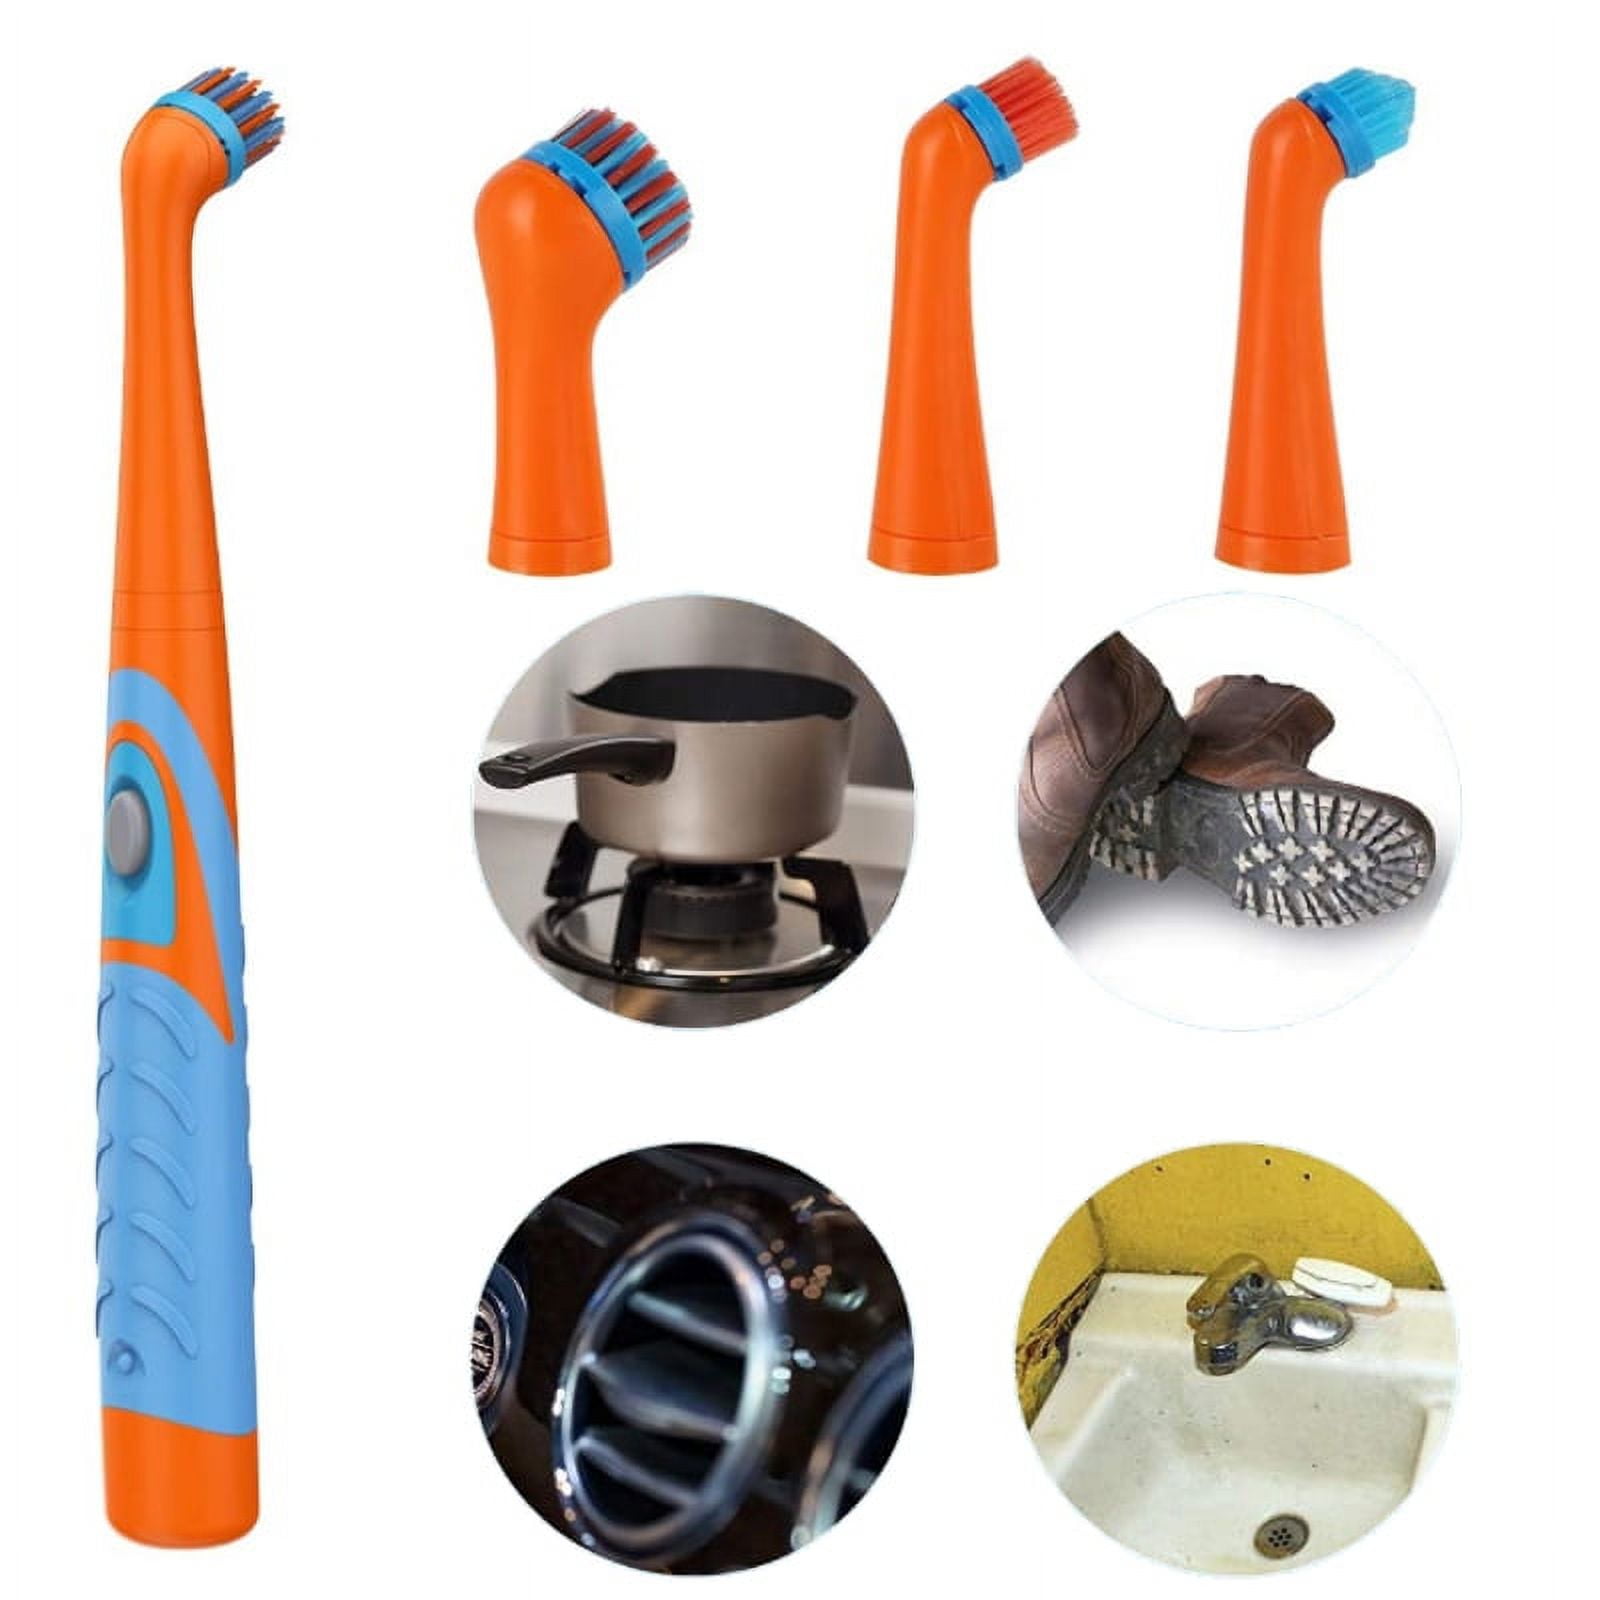 NEW Sonic Scrubber Scrubbing Bubbles Tool Power Cleaner Tool